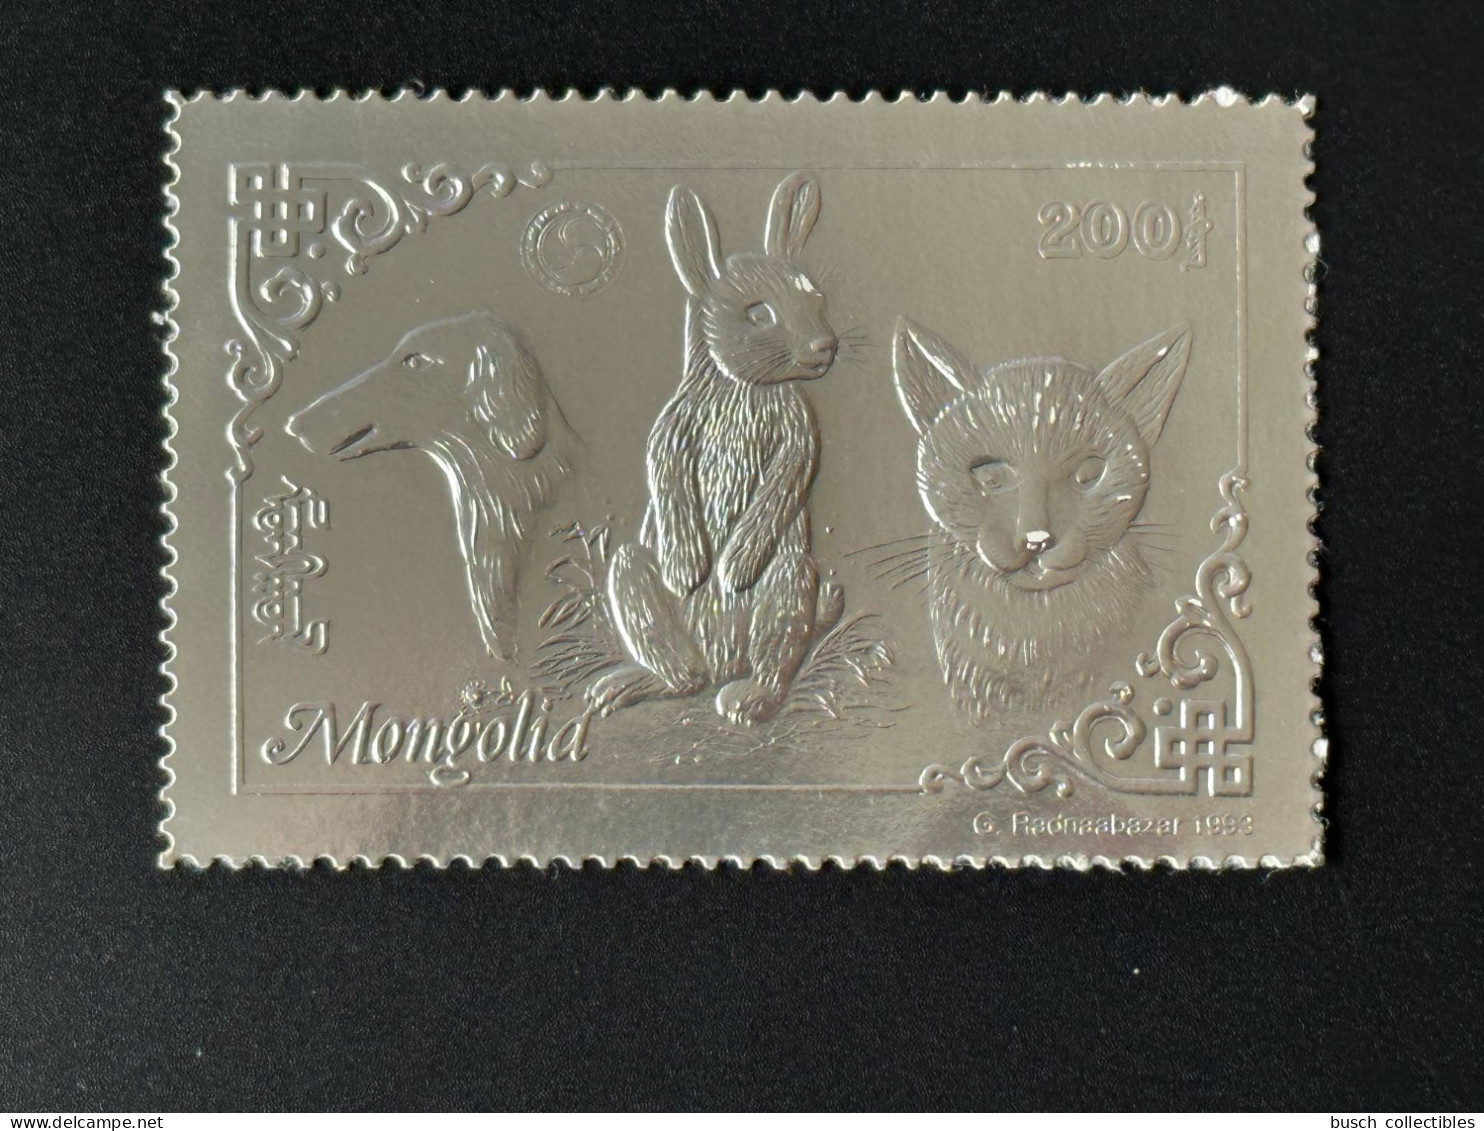 Mongolie Mongolia 1993 Mi. 2474 A Silver Argent Rotary Lions Chien Hund Dog Katze Cat Chat Lapin Rabbit Hase - Mongolia